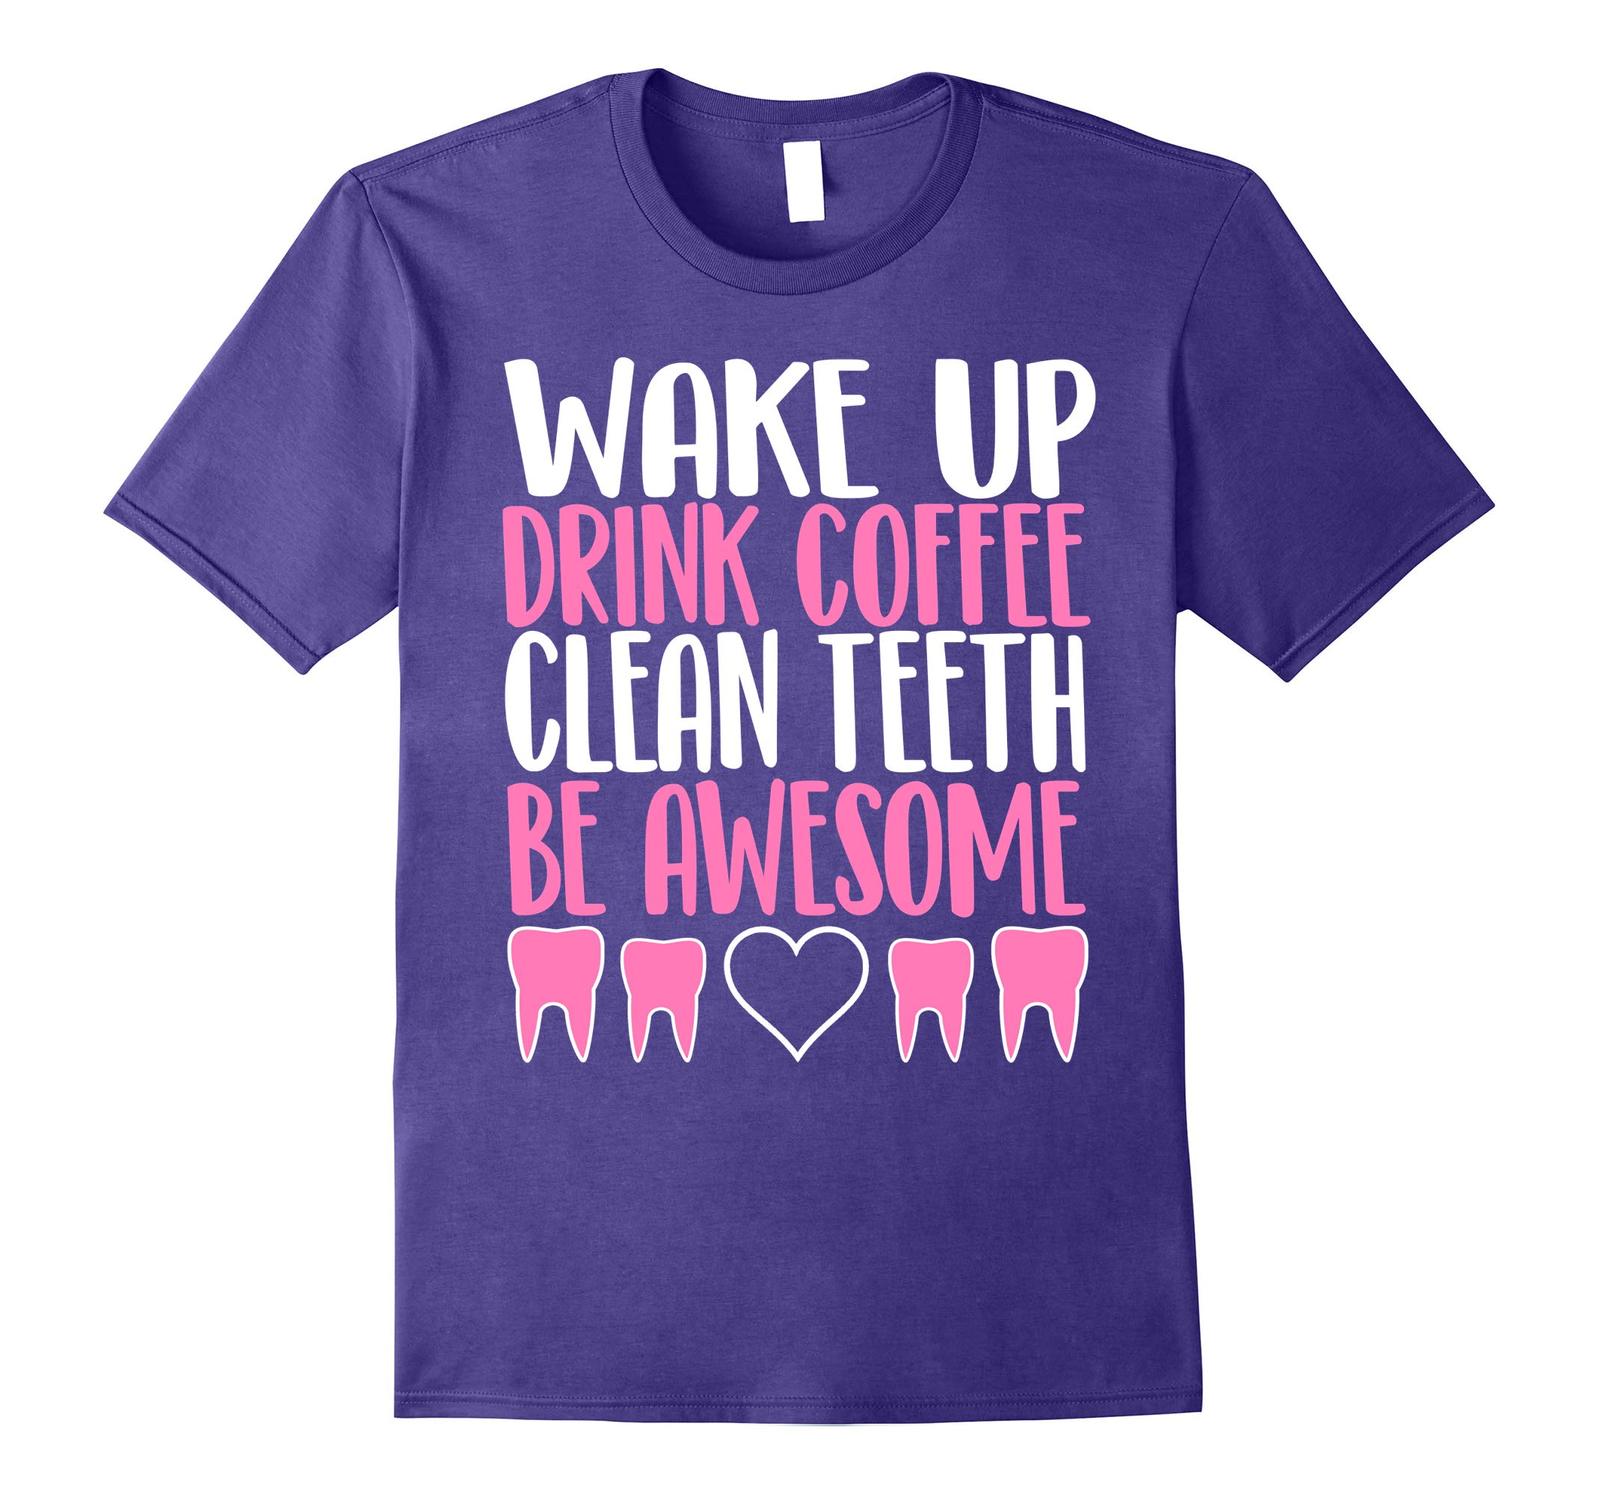 New Shirts Funny Dentist Dental Assistant Clean Shirtsth Be Awesome